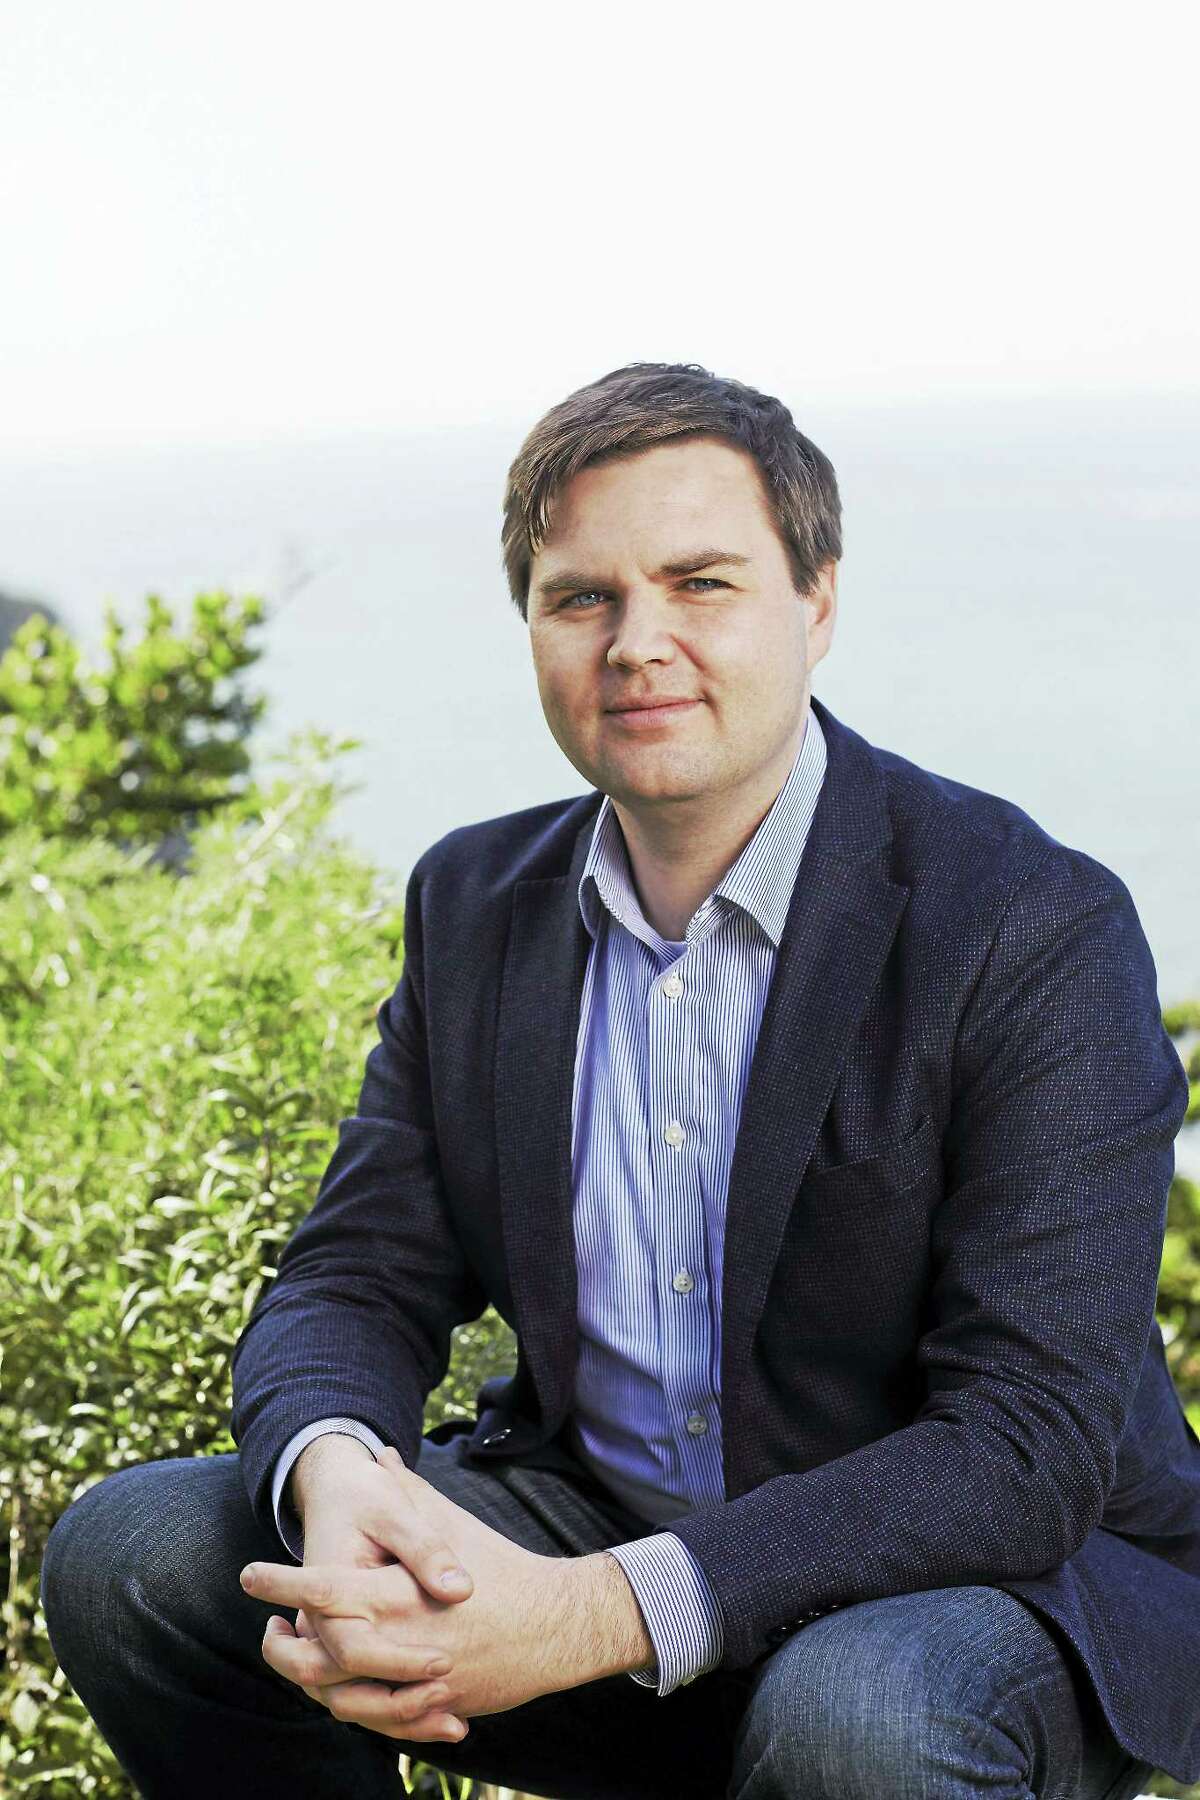 Author J.D. Vance J.D. Vance grew up in Middletown, Ohio, with his mother who suffered from a drug addiction. The film depicts Vance's maternal grandmother as a central figure in his life who helped put him on a path to college. He graduated from the Yale Law School in 2013 after serving in the Marines. Three years later in 2016, his book “Hillbilly Elegy: A Memoir of a Family and Culture in Crisis” was published; it became a New York Times Best Seller.